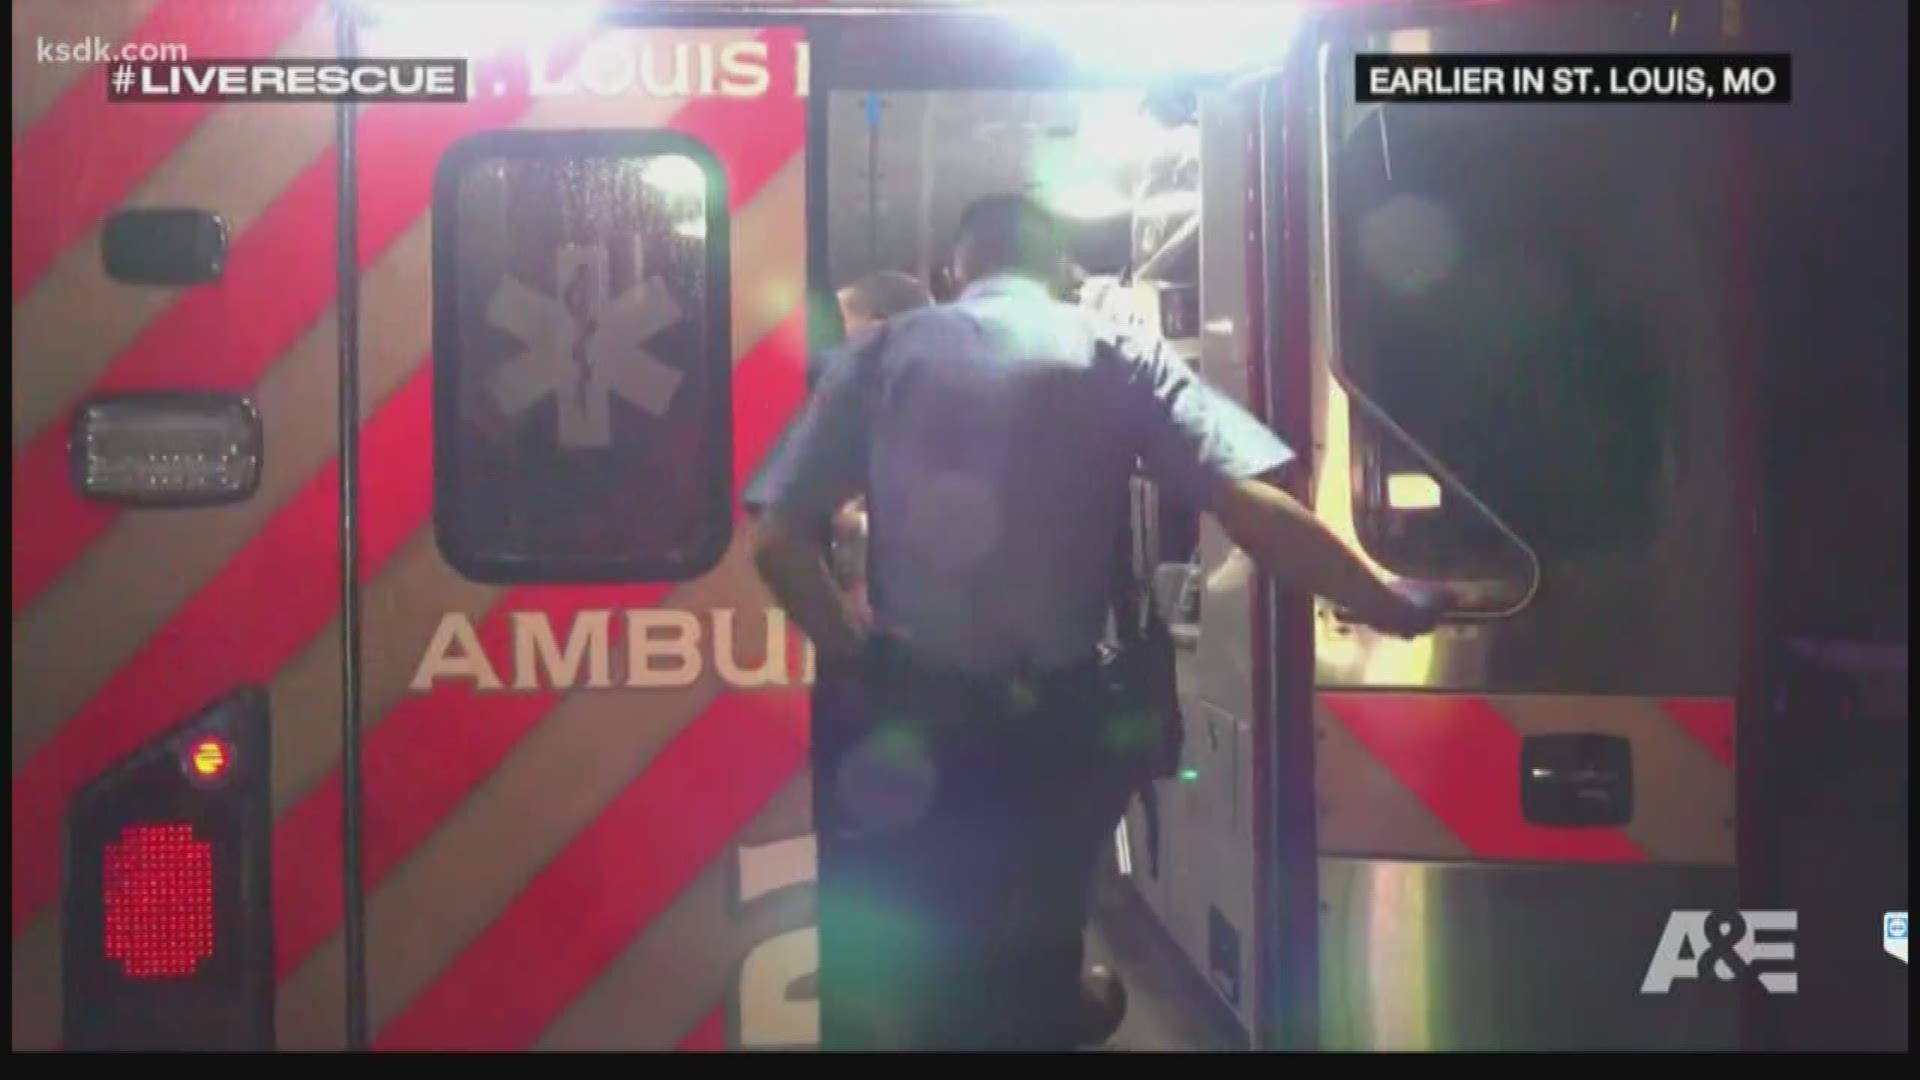 The show follows firefighters, paramedics and EMTs from across the country as they respond to emergency rescue calls.